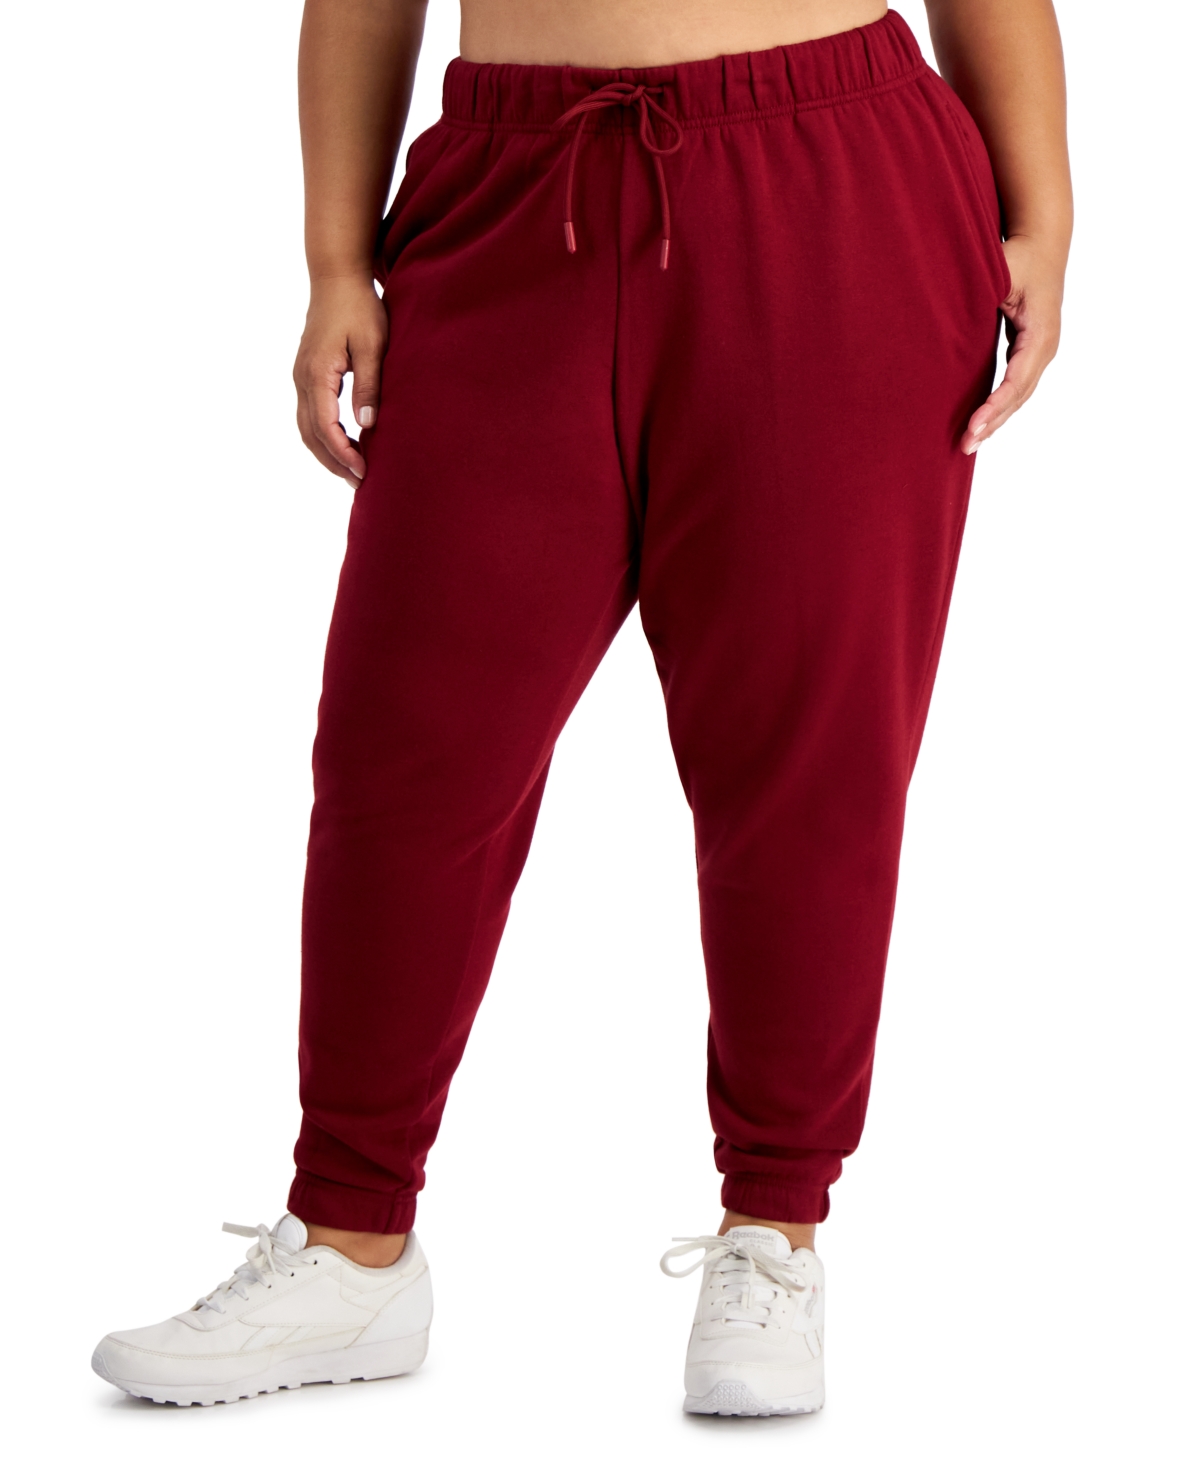 Plus Size High-Rise Solid Fleece Jogger Pants, Created for Macy's - Sweet Wine